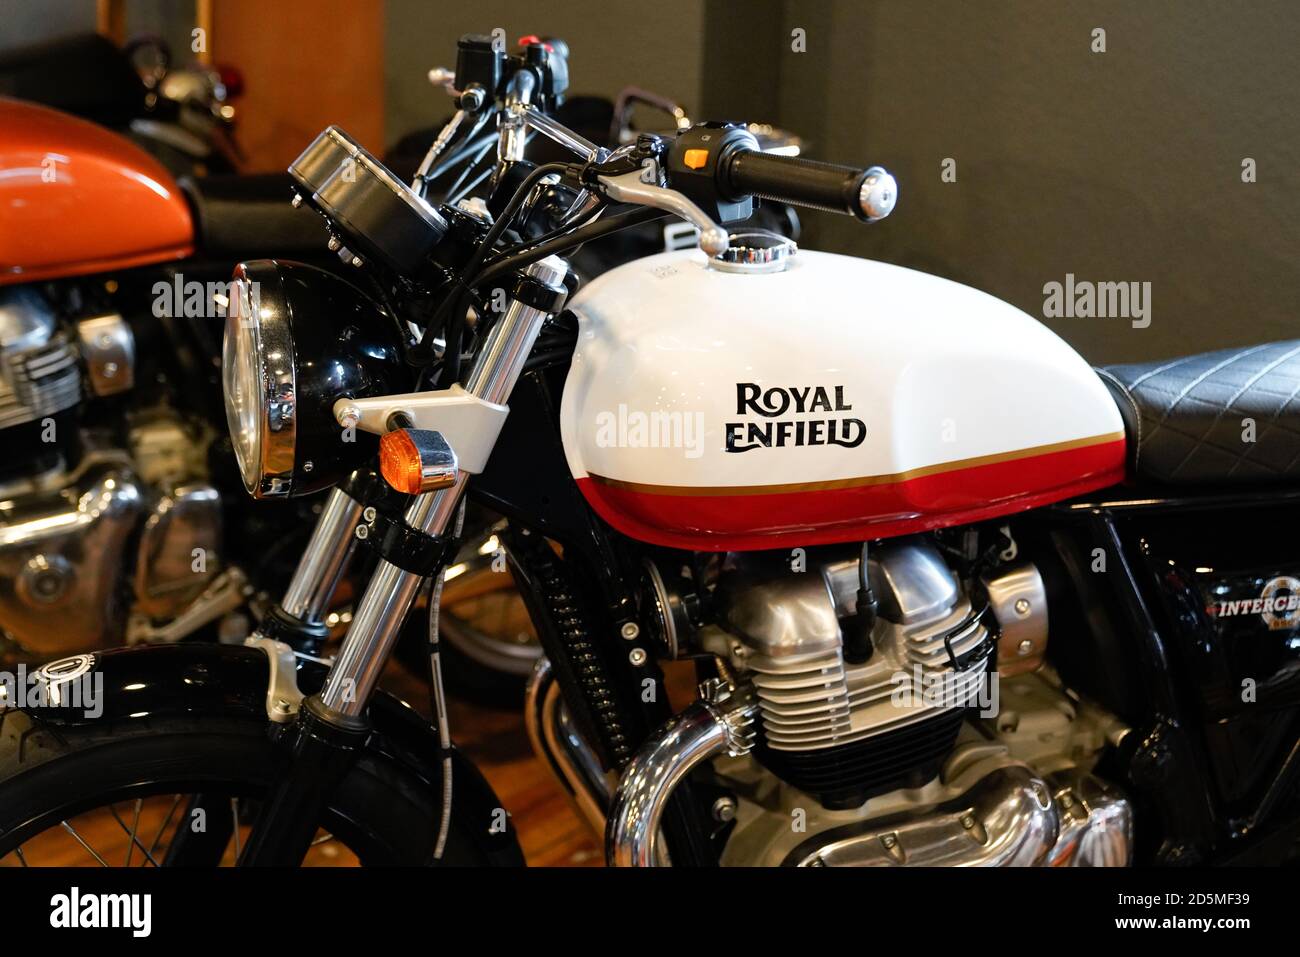 Bordeaux , Aquitaine / France - 10 01 2020 : Royal Enfield tank logo sign  on motorcycle white red side detail of vintage indian motorbike Stock Photo  - Alamy